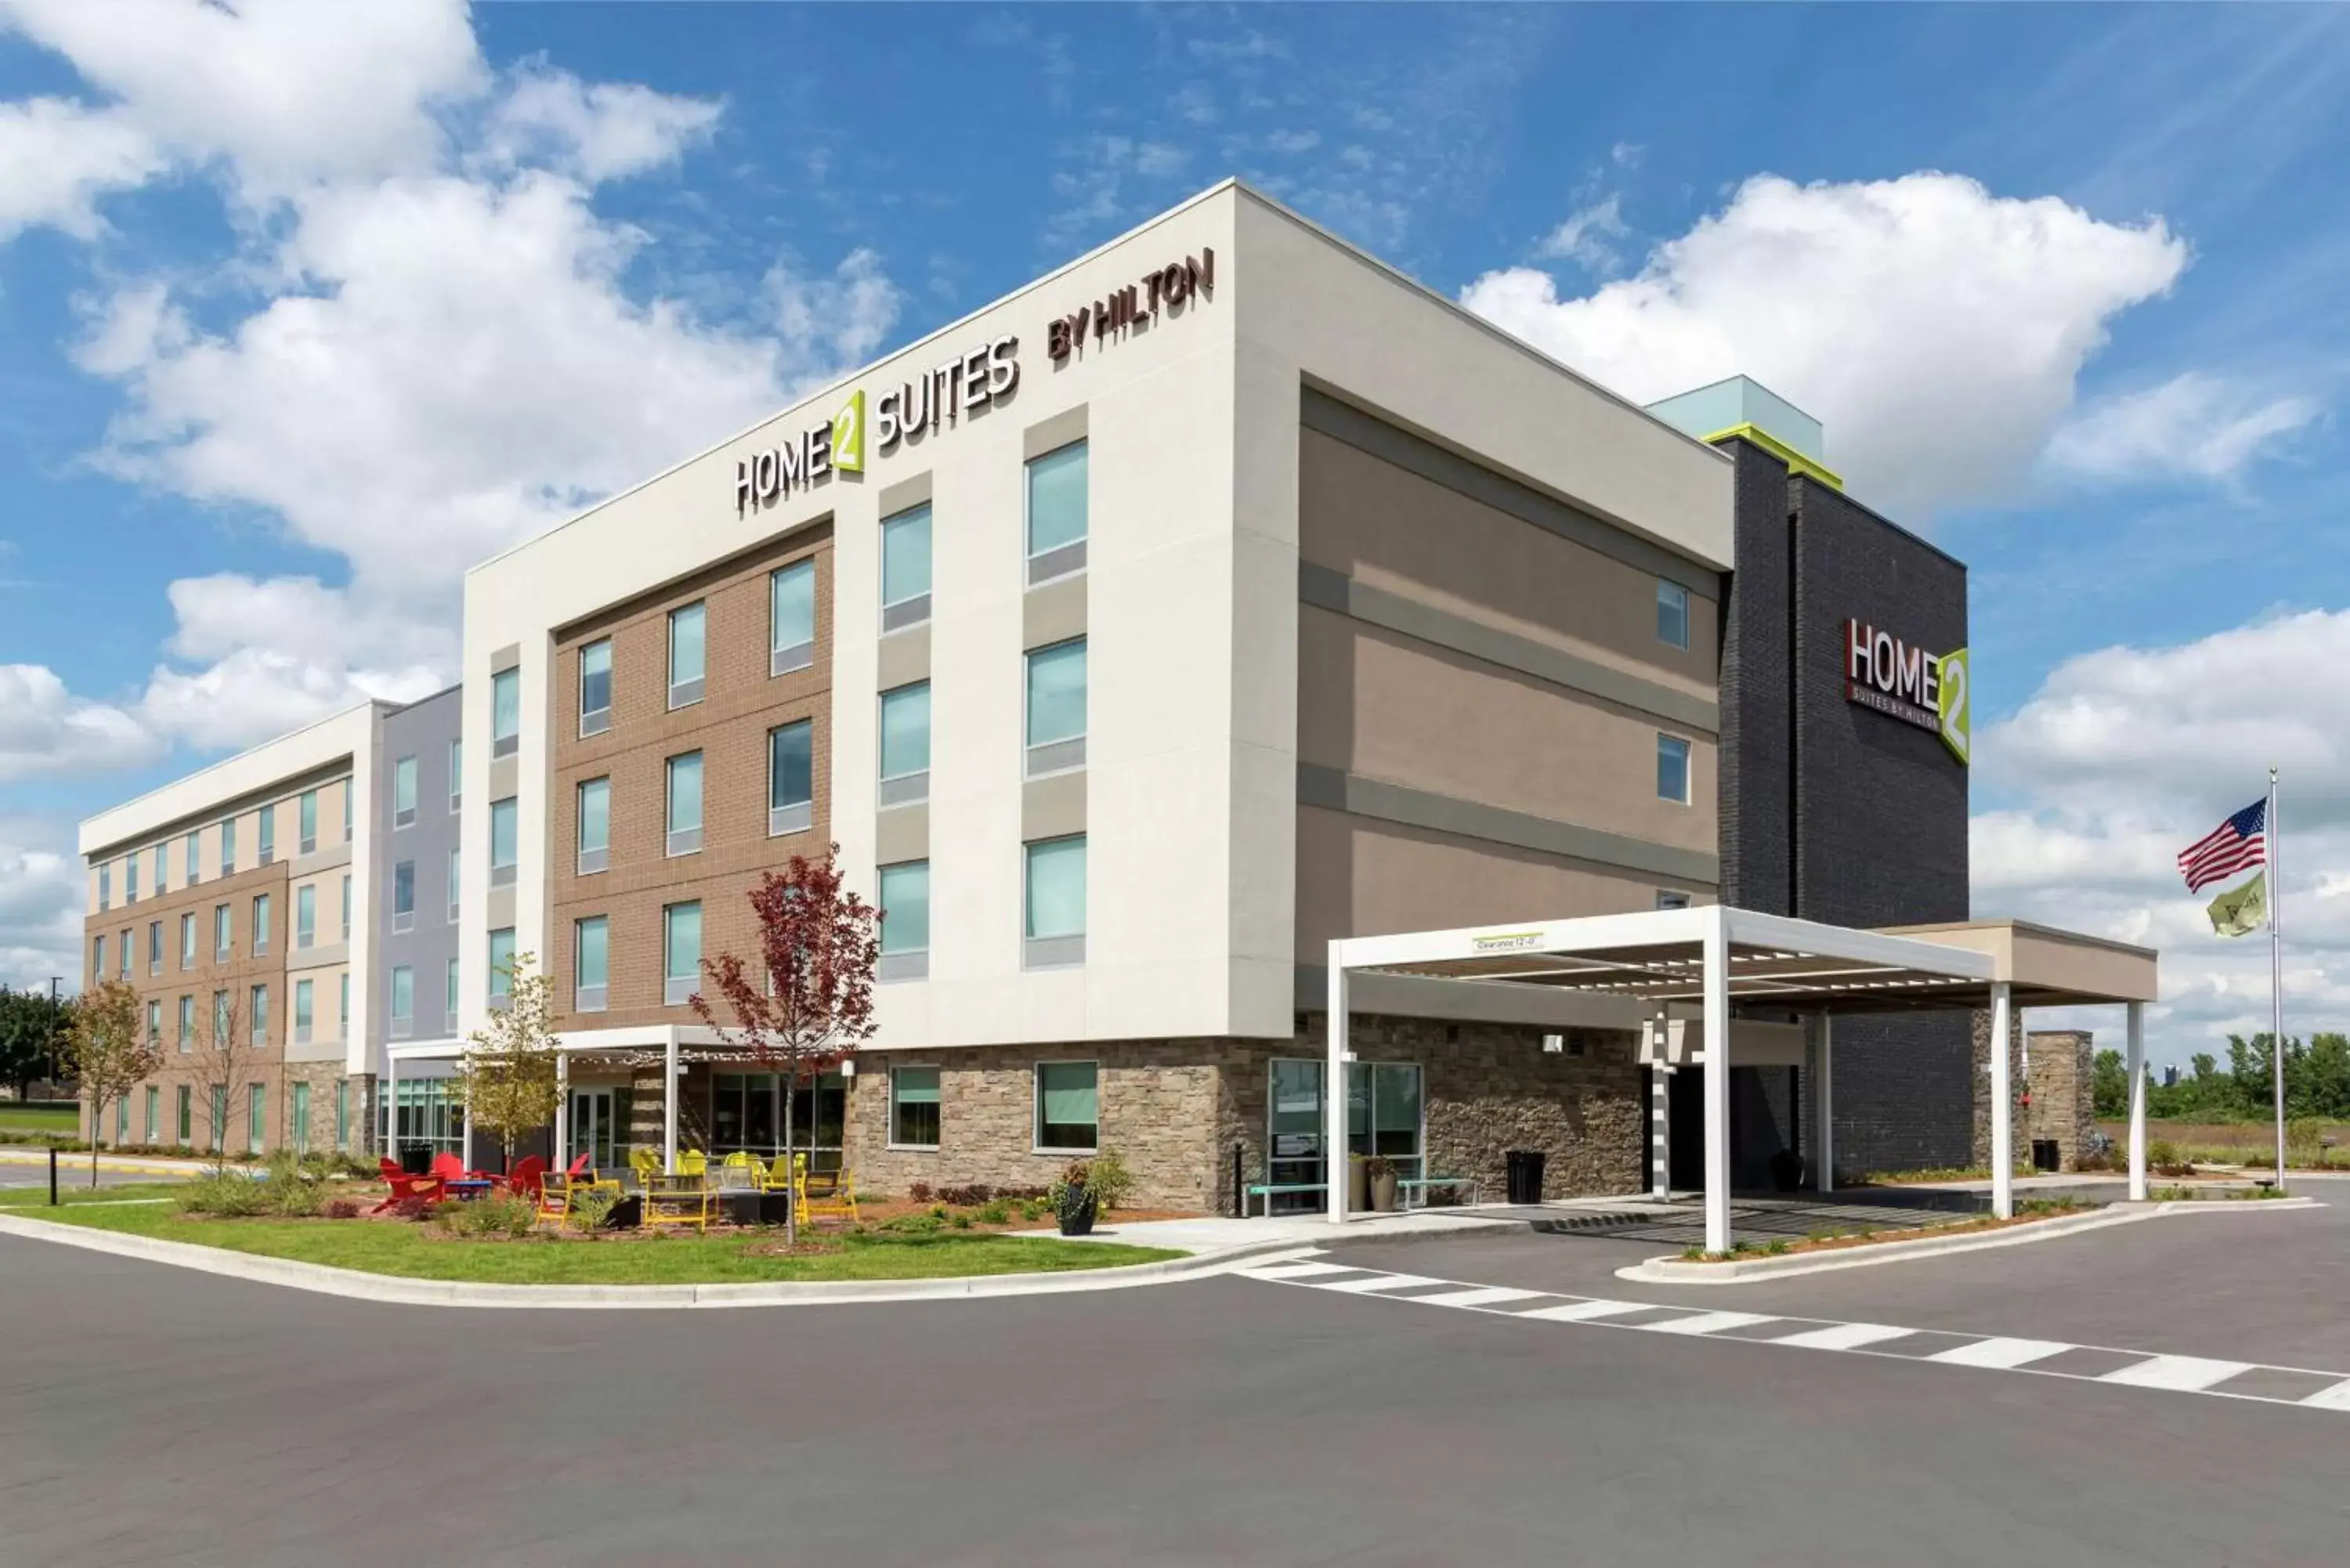 Property Building in Home2 Suites By Hilton Appleton, Wi